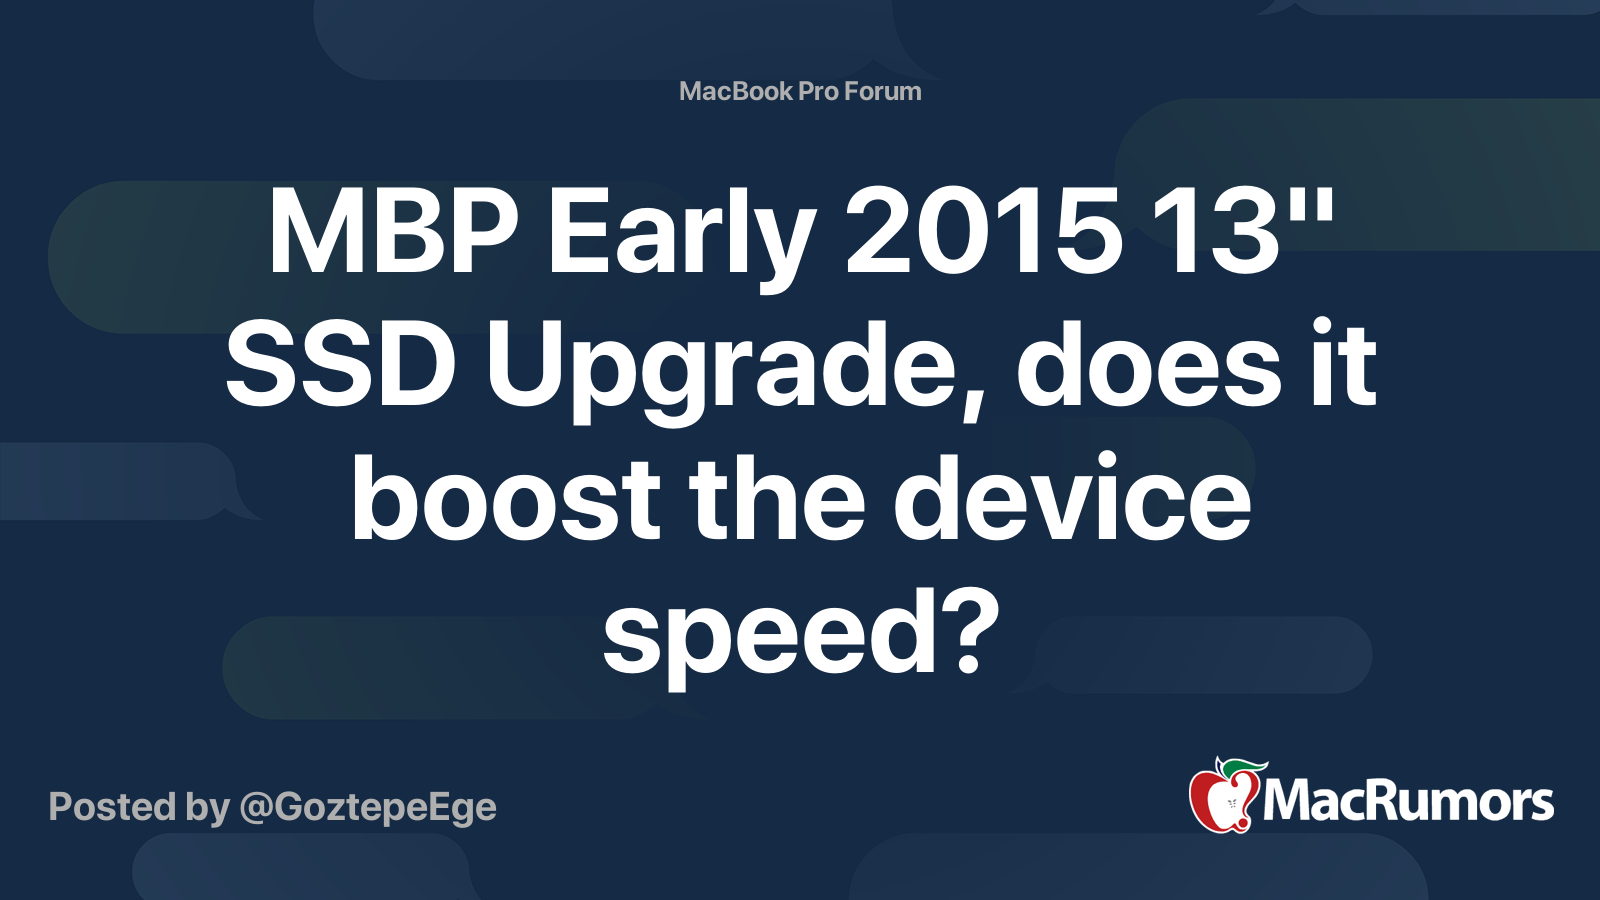 MBP Early 2015 13" SSD Upgrade, does it boost device speed? MacRumors Forums